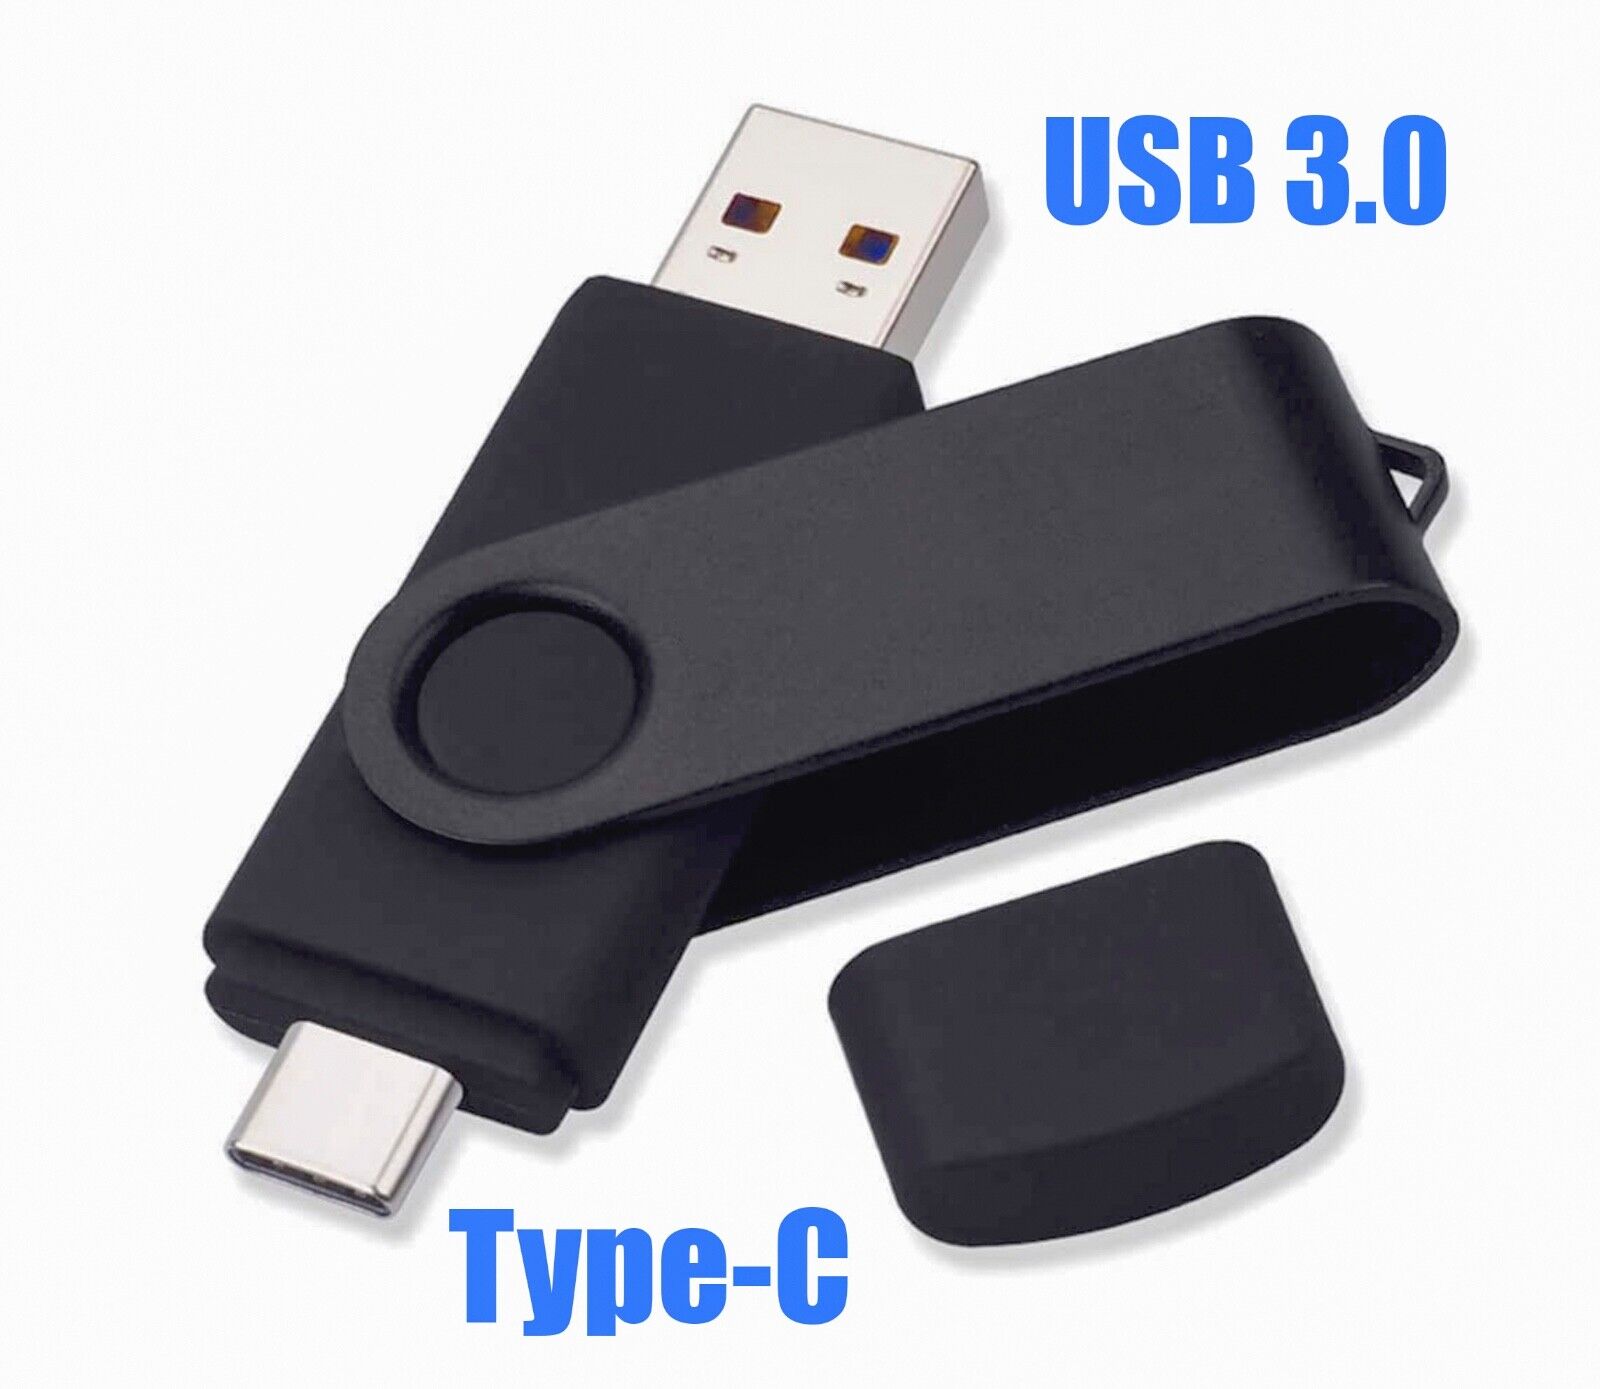 OTG USB 3.0 and Type C Flash Drive for Android and Apple devices 32GB-Fast Speed